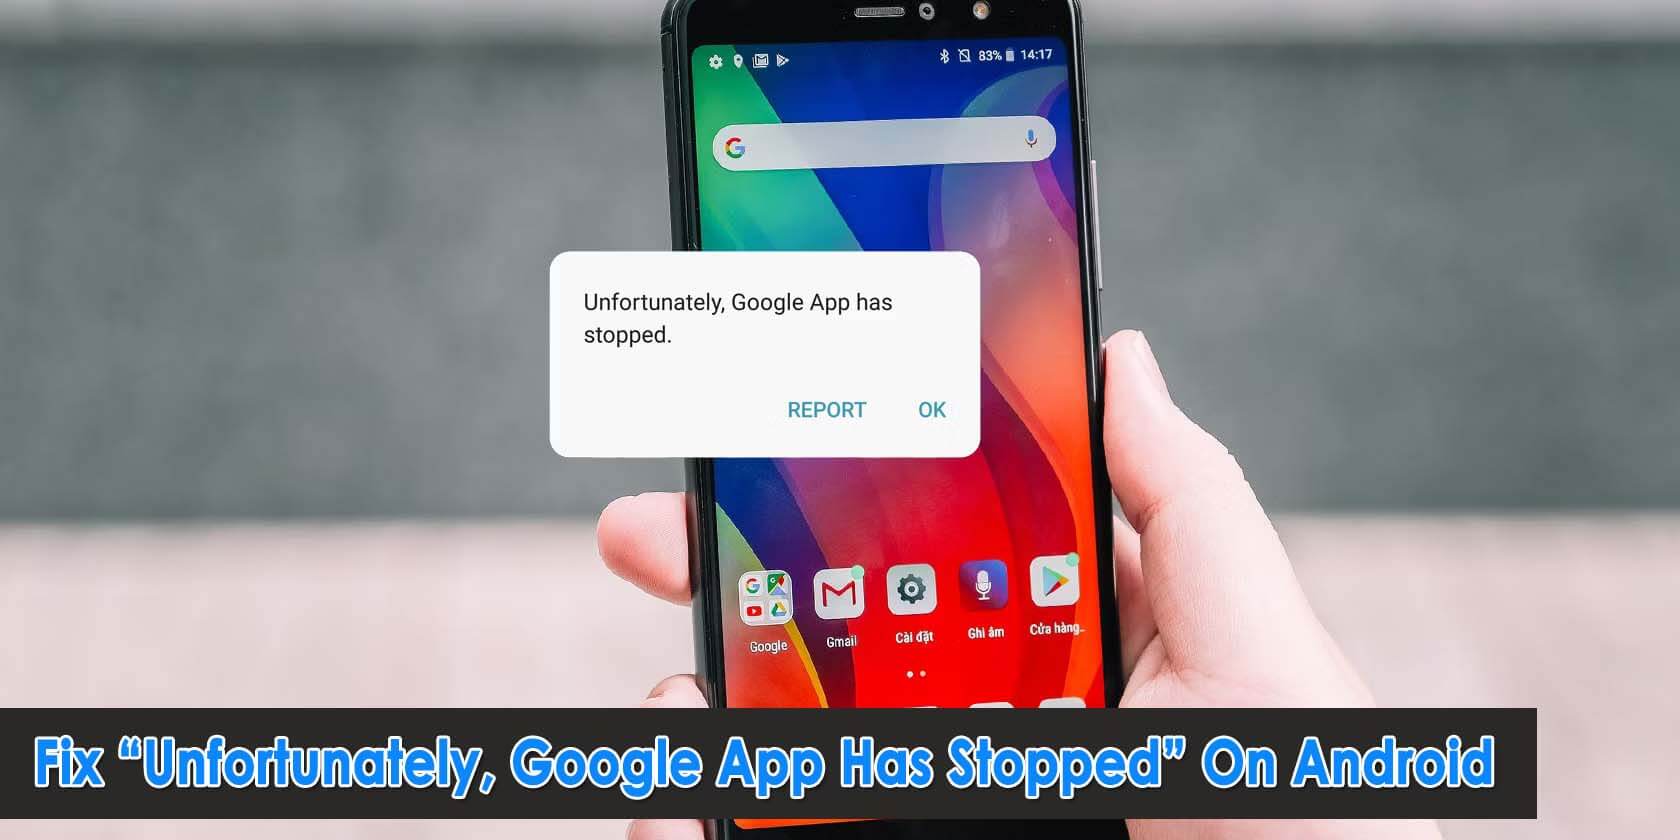 [12 Ways] Fix “Unfortunately, Google App Has Stopped” On Android